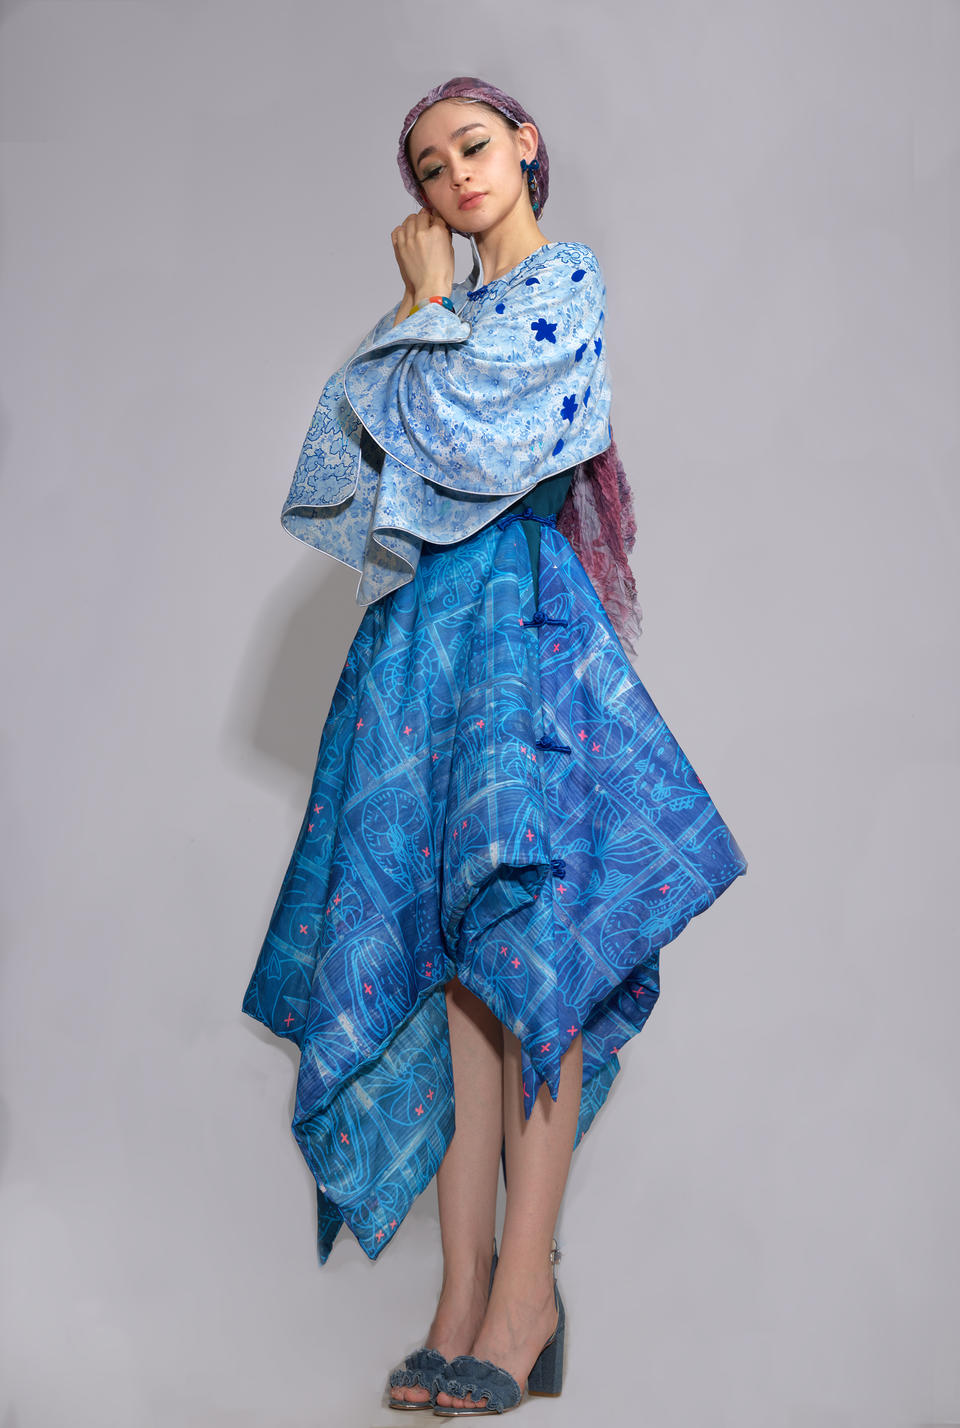  the recycled bed sheet cape and a wearable blanket skirt, with a dress wig